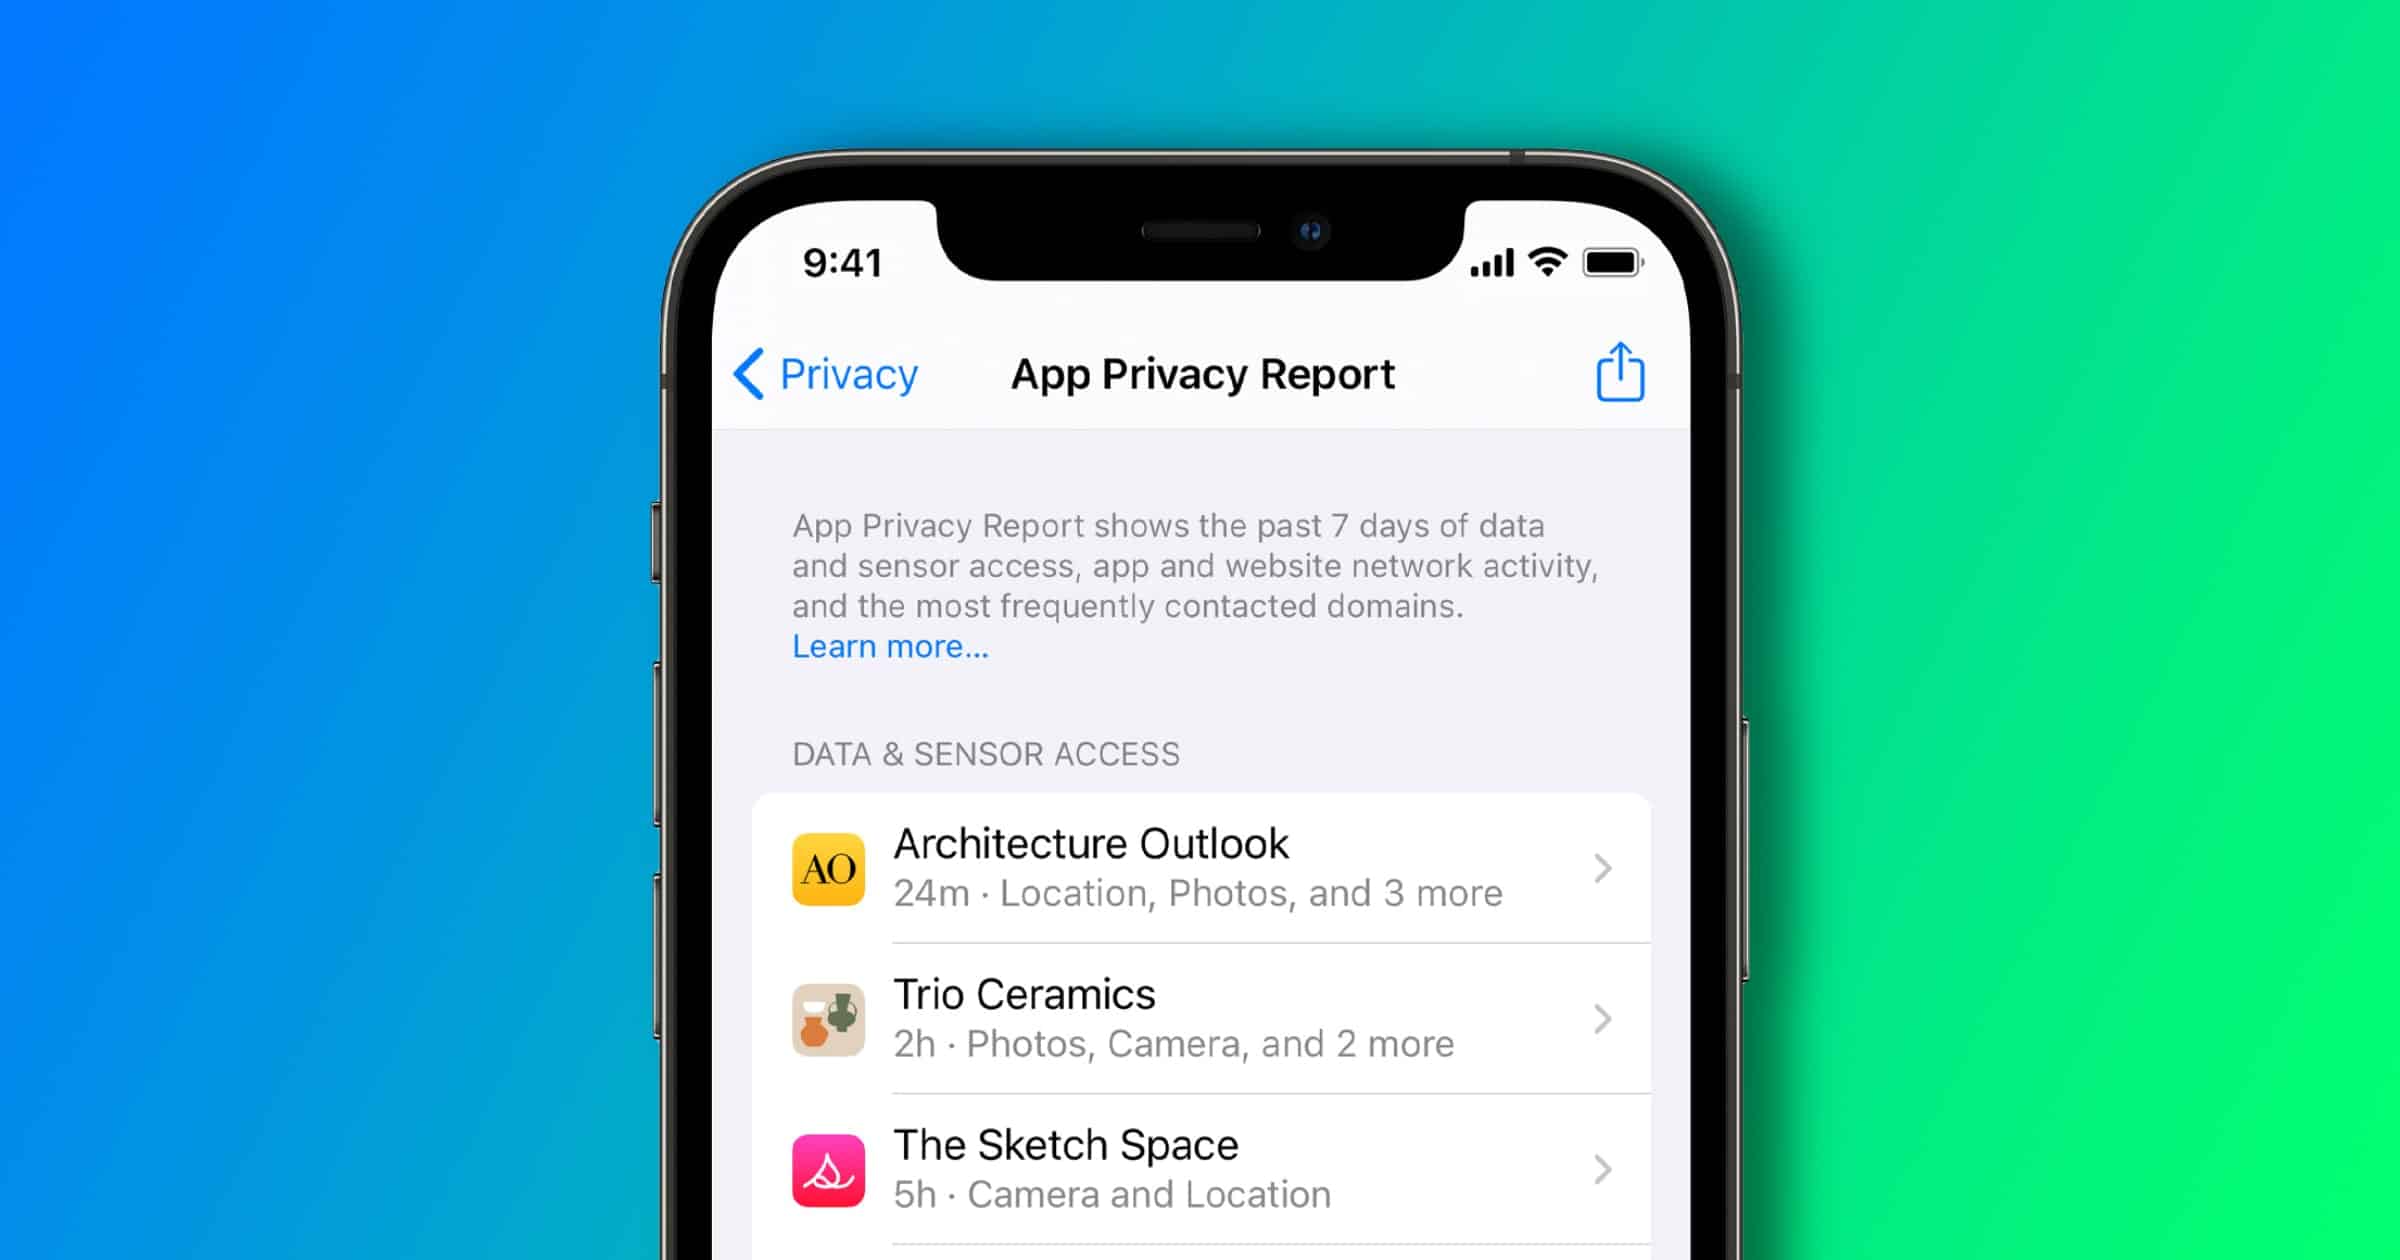 Craig Federighi Talks About WWDC 2021 Privacy Features